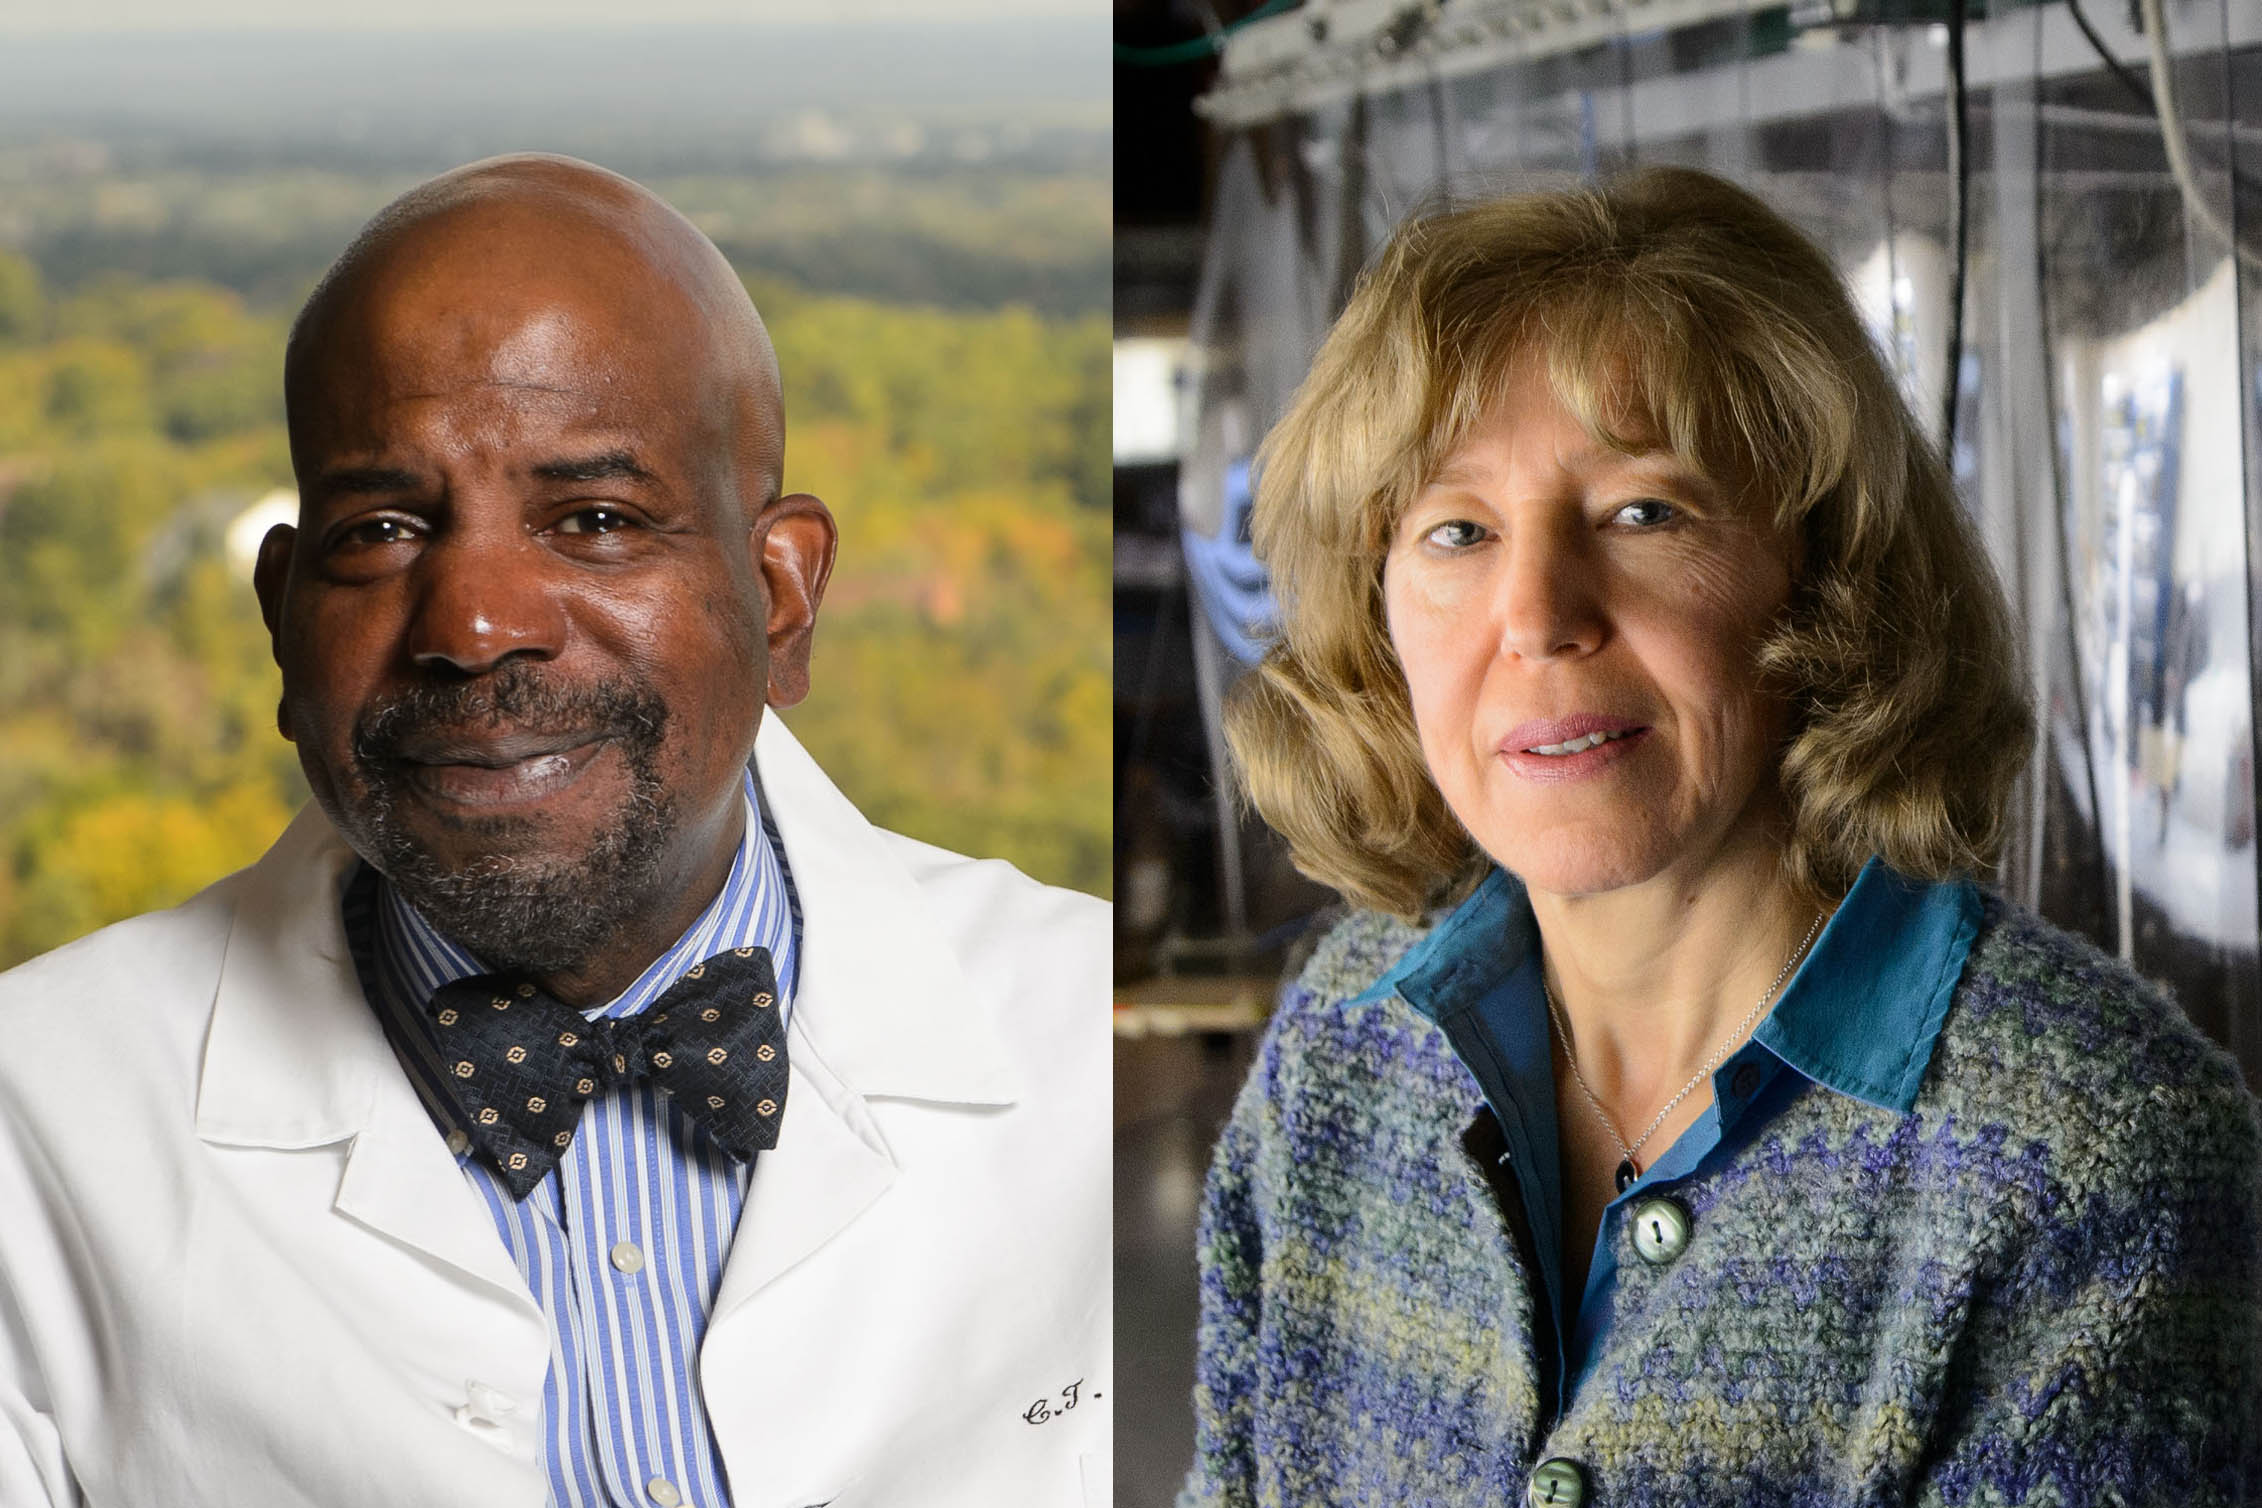 Dr. Cato Laurencin, left, and physics professor Nora Berrah have been elected to the American Academy of Arts and Sciences, Class of 2019. (Peter Morenus/UConn Photos)